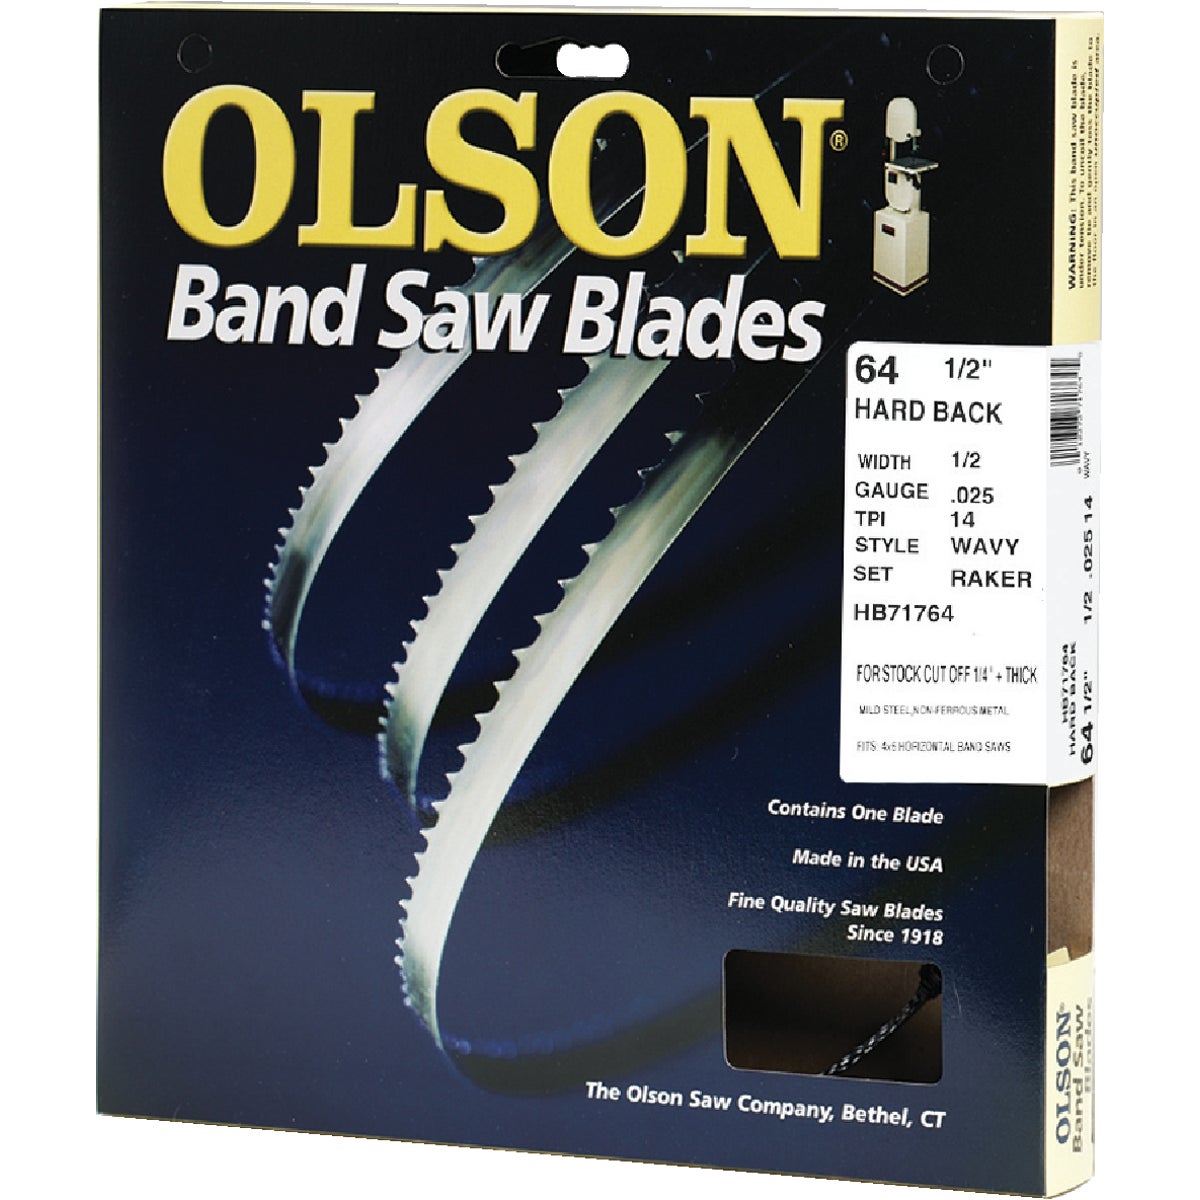 Item 348015, Heavy-duty, durable, commercial grade Hard Edge Hard Back band saw blades 